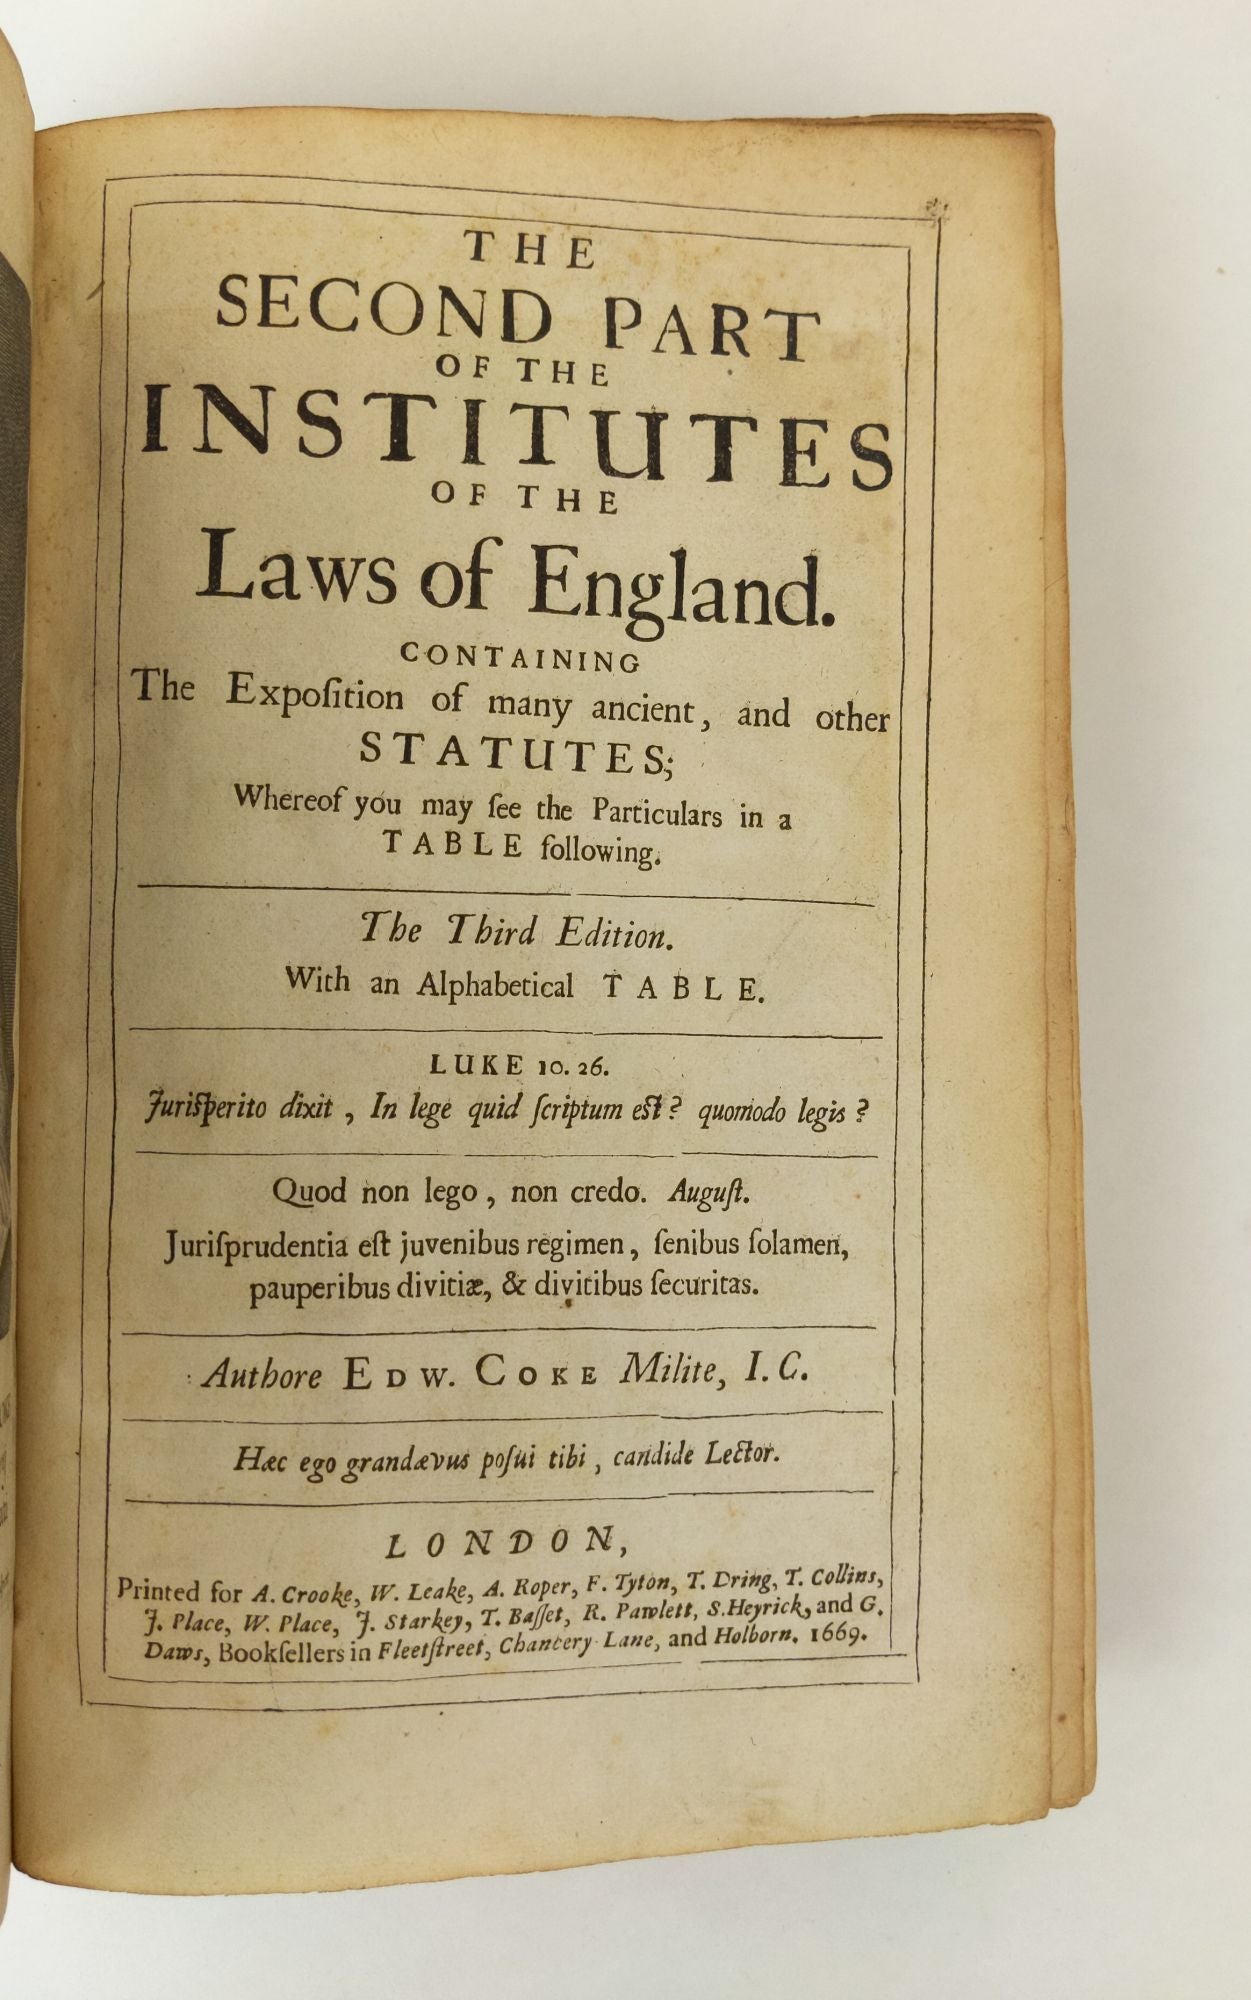 Product Image for THE SECOND PART OF THE INSTITUTES OF THE LAWS OF ENGLAND